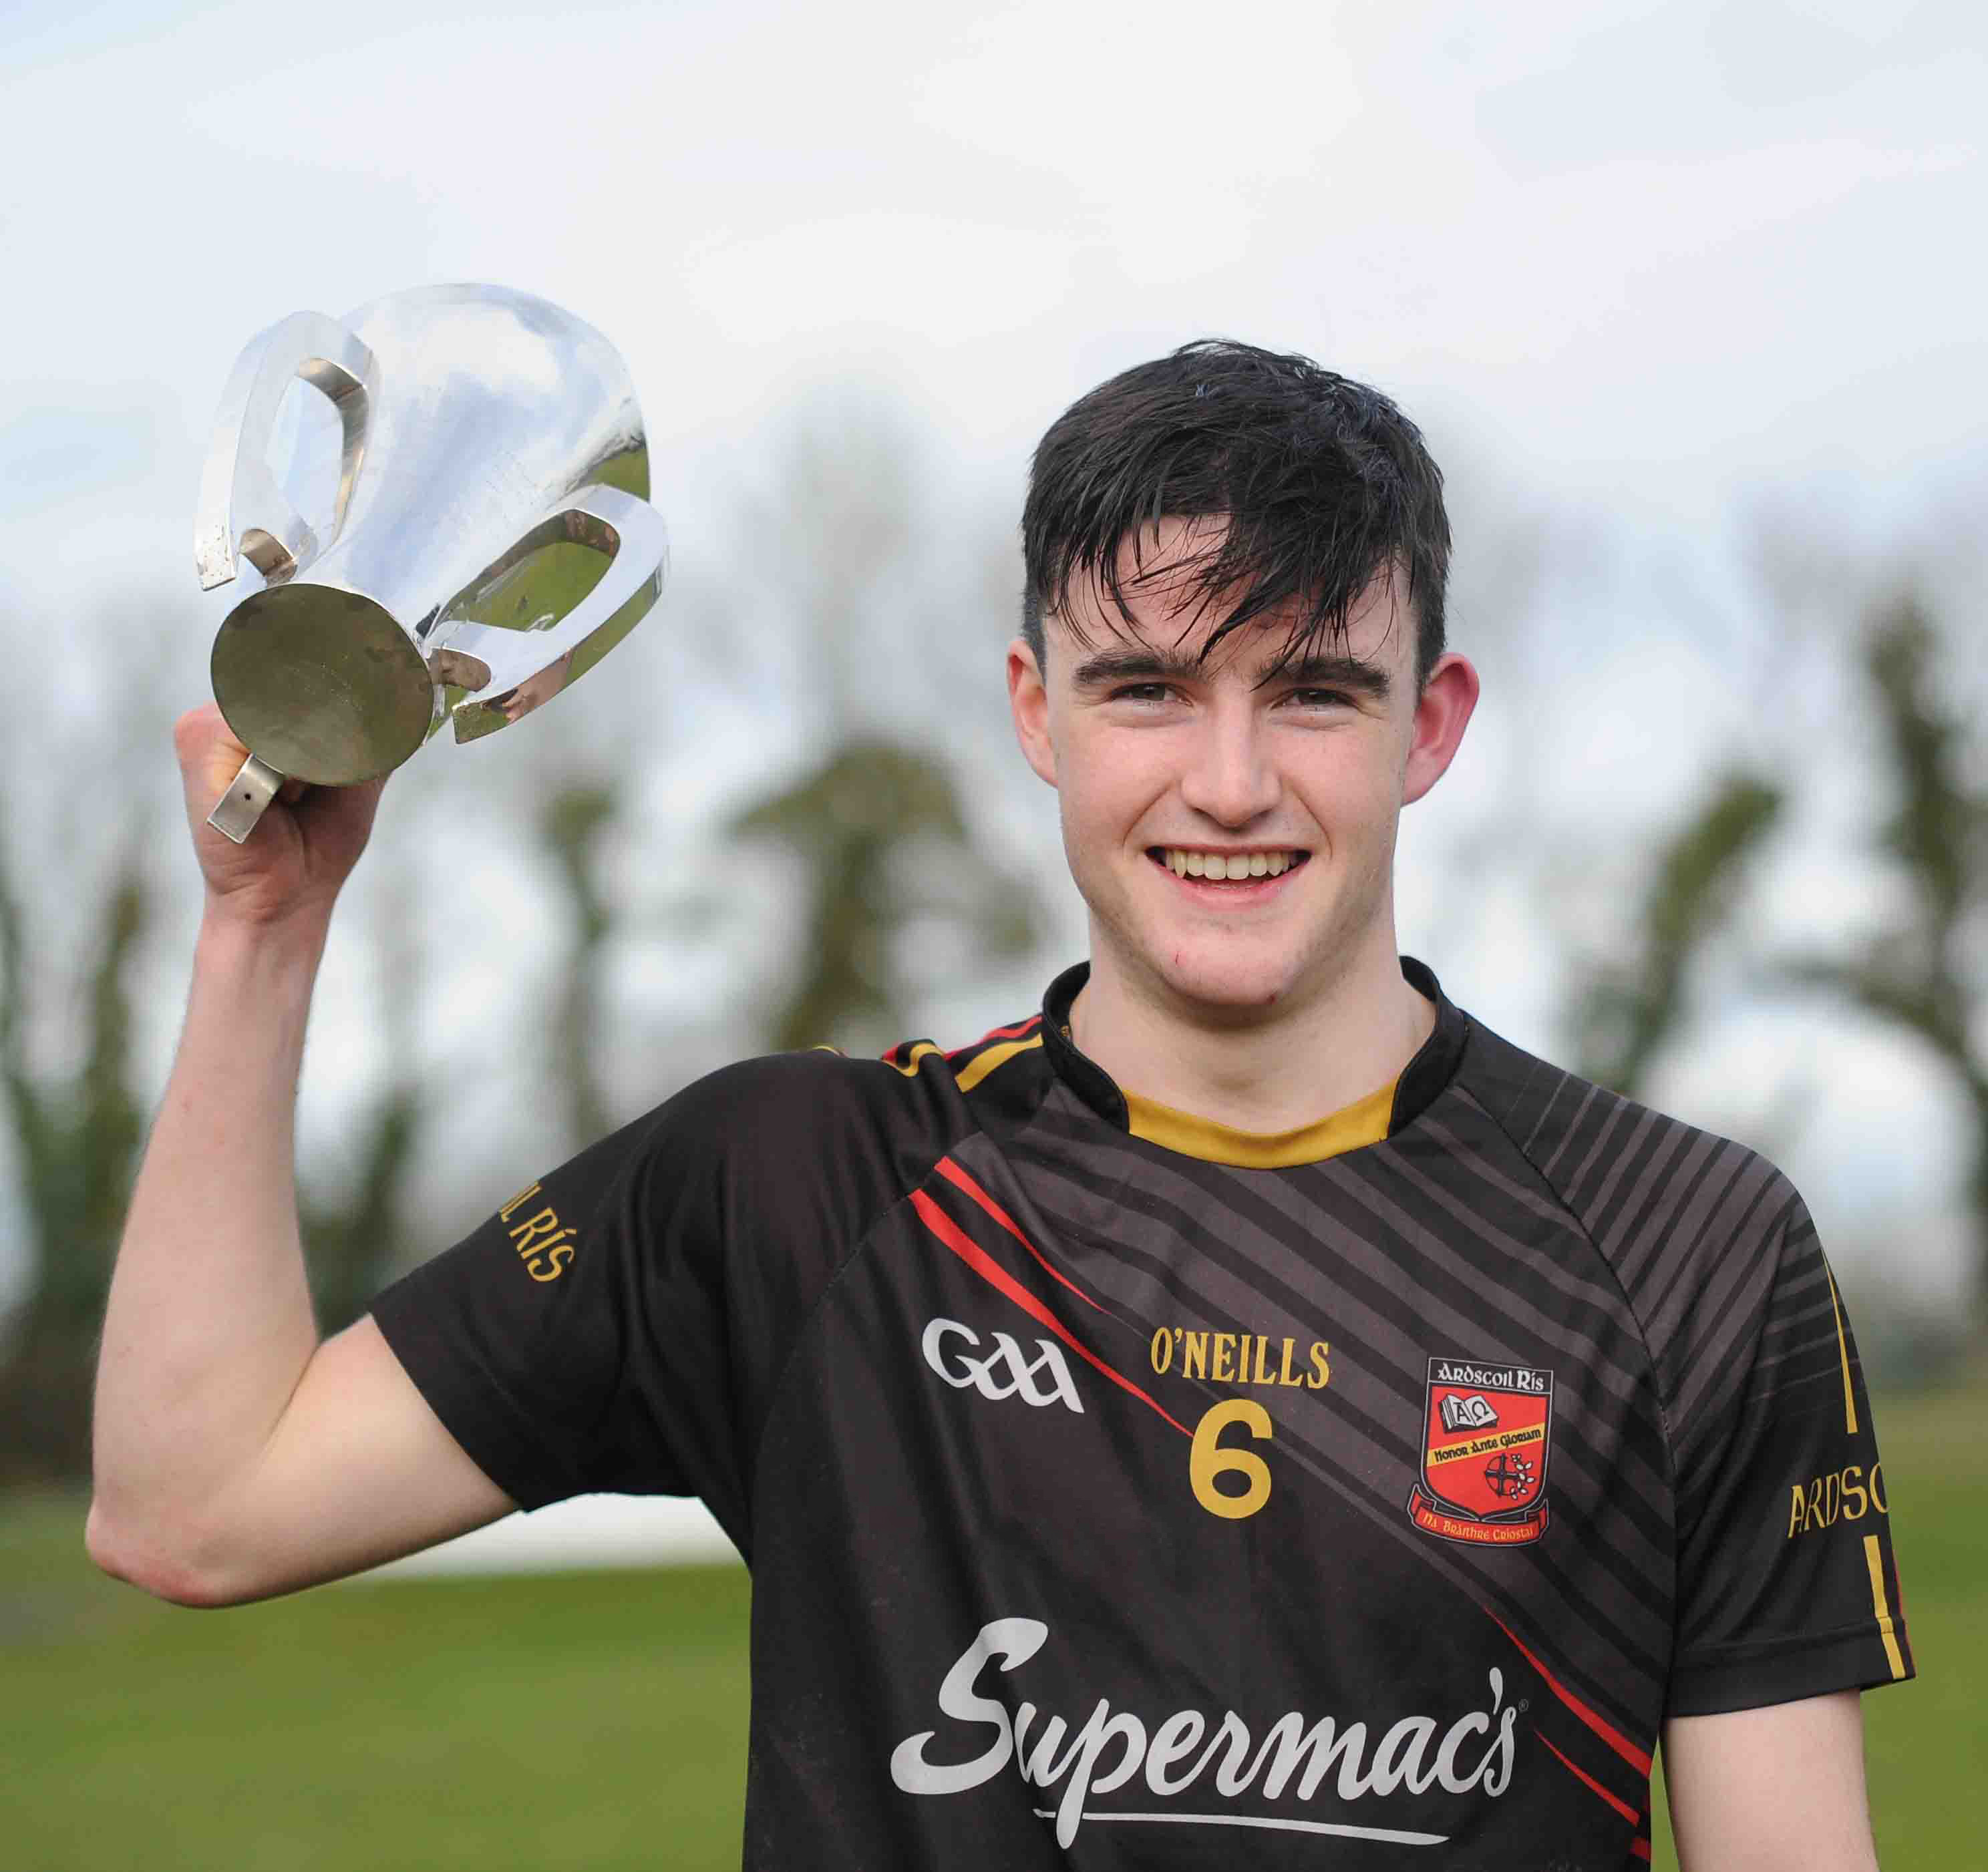 Dr. Harty Cup Hurling – 2018/2019 Draws